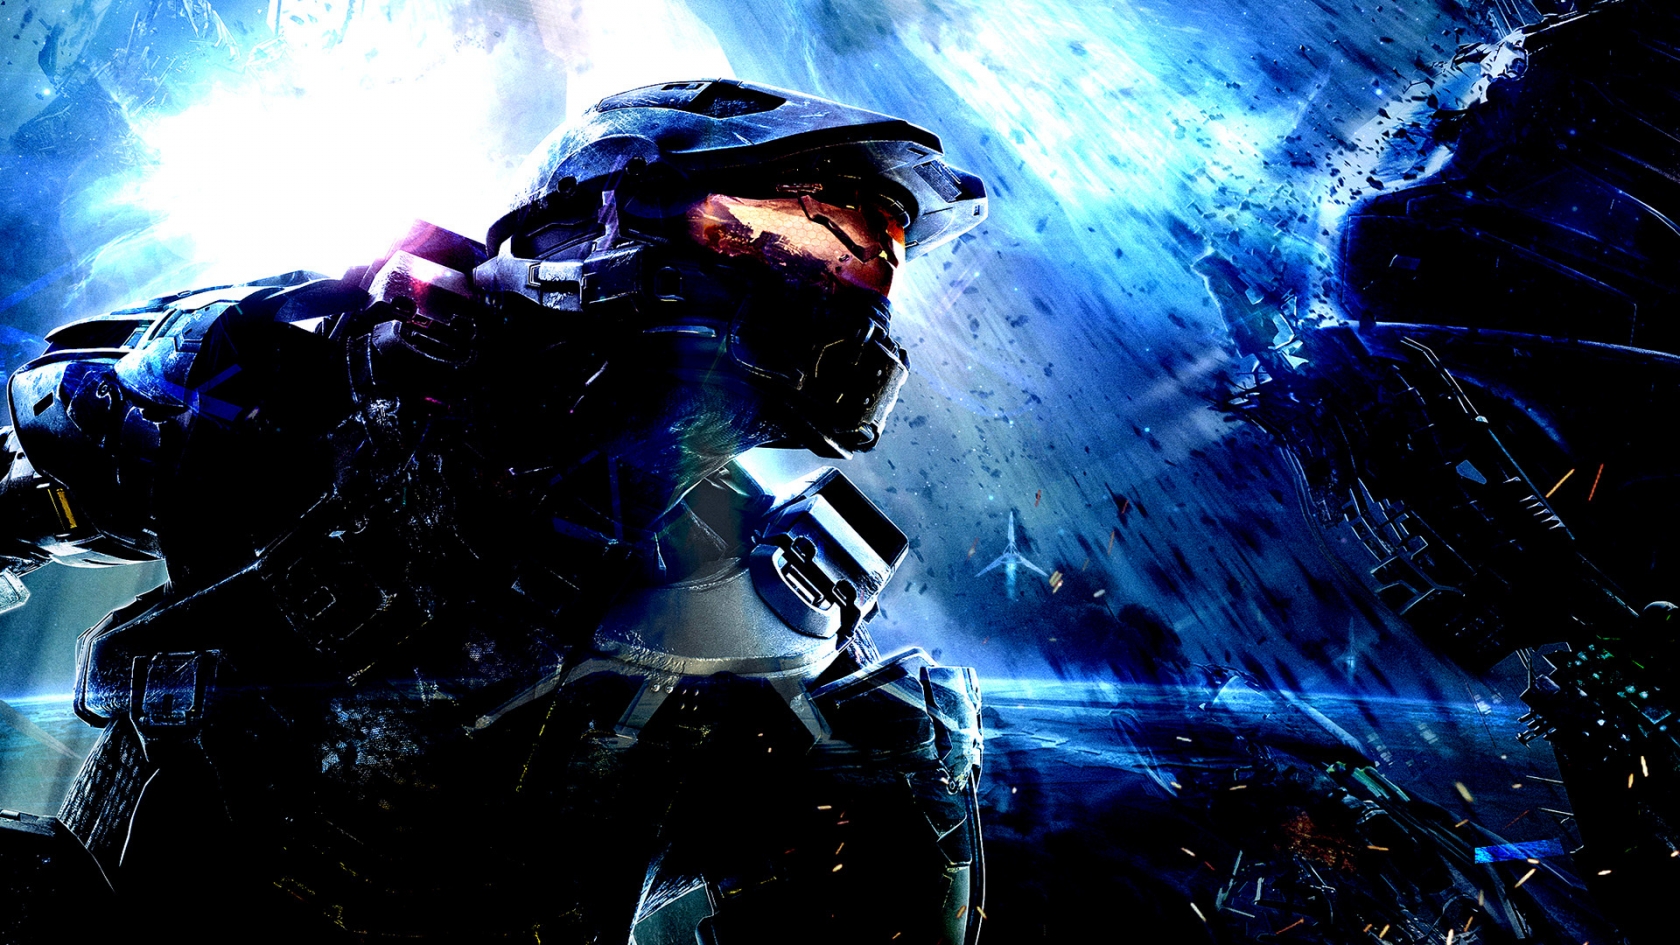 Halo 4 Complex for 1680 x 945 HDTV resolution